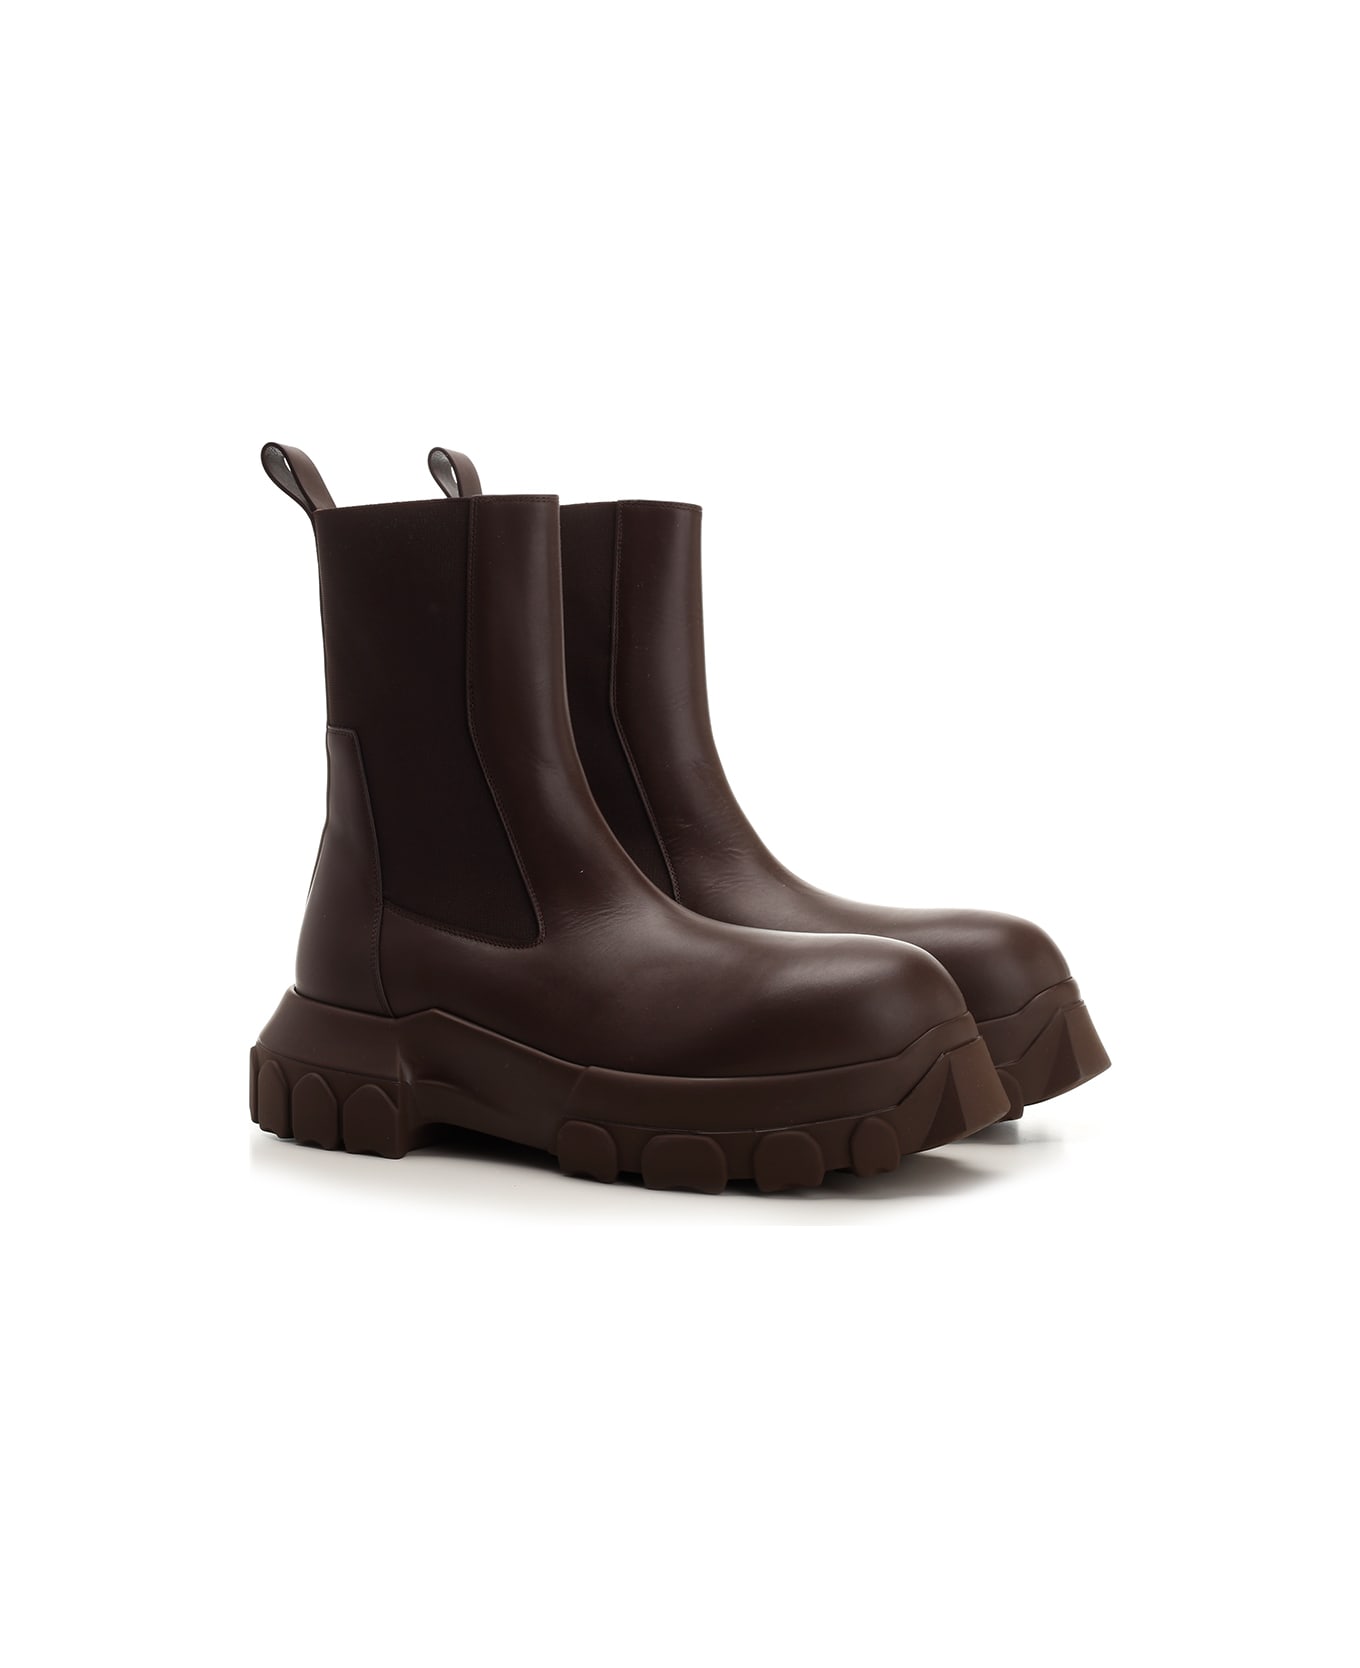 Rick Owens 'beatle Bozo' Ankle Boots - Brown ブーツ